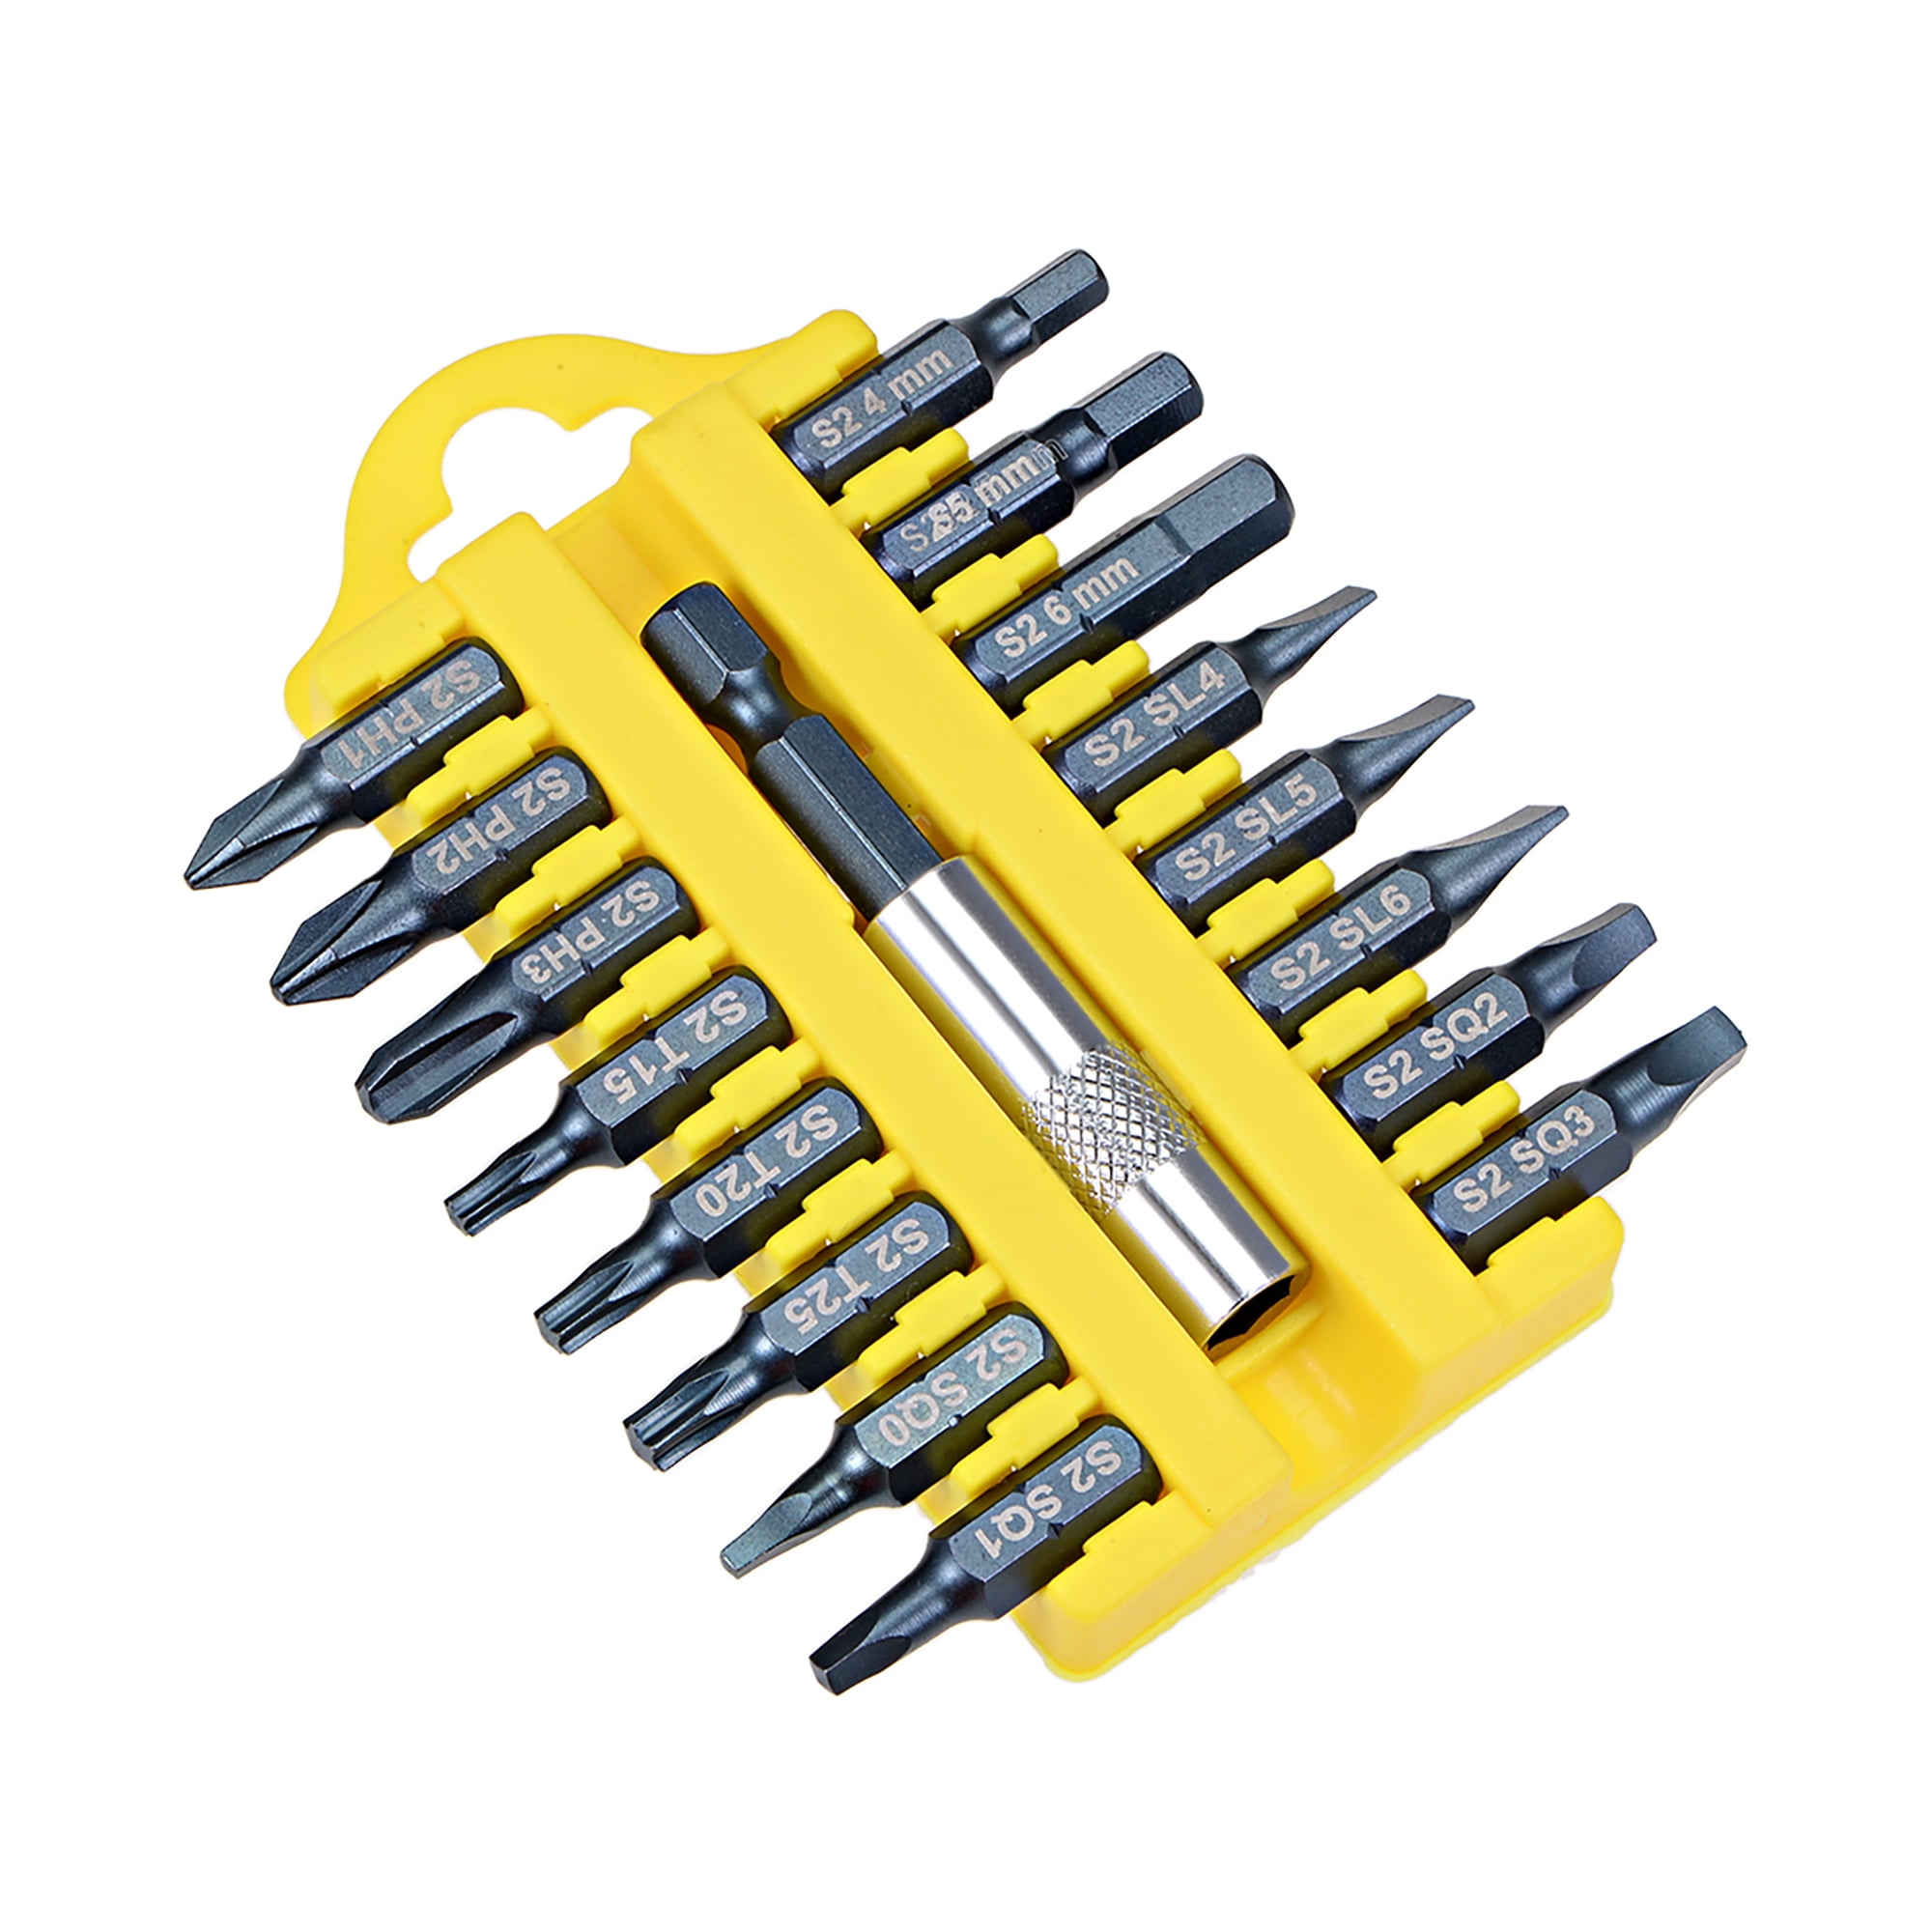 Details about   S2 Steel Power Screwdriver Bits Set Phillips Slotted Slotted Torx 1/4" Hex Shank 